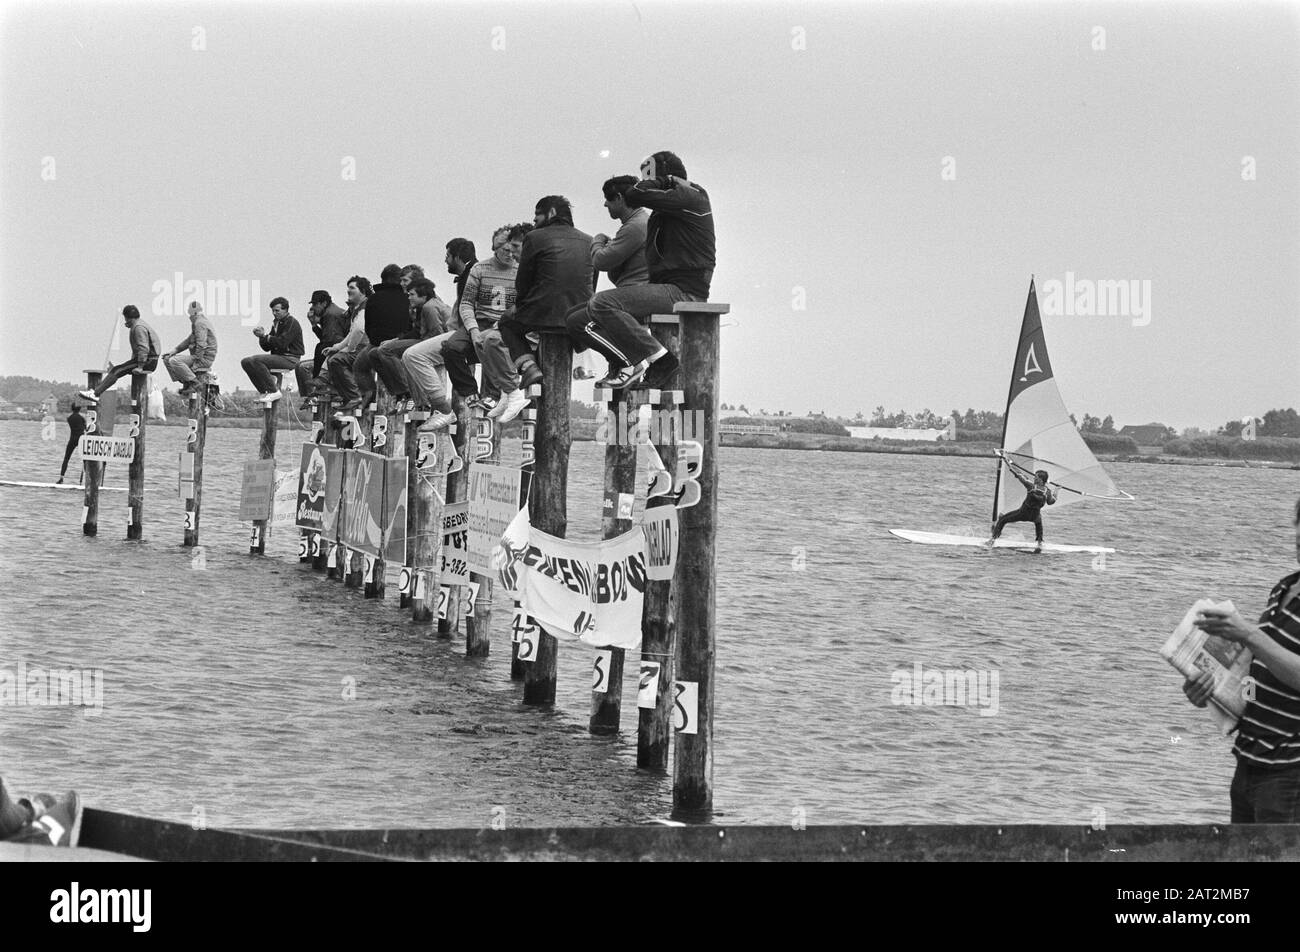 World Championships in Noordwijkerhout; Pole seaters at the Oostduin lake Date: 22 July 1981 Location: Noordwijkerhout, Zuid-Holland Keywords: pole sitten, World Championships Personal Name: MORE Stock Photo